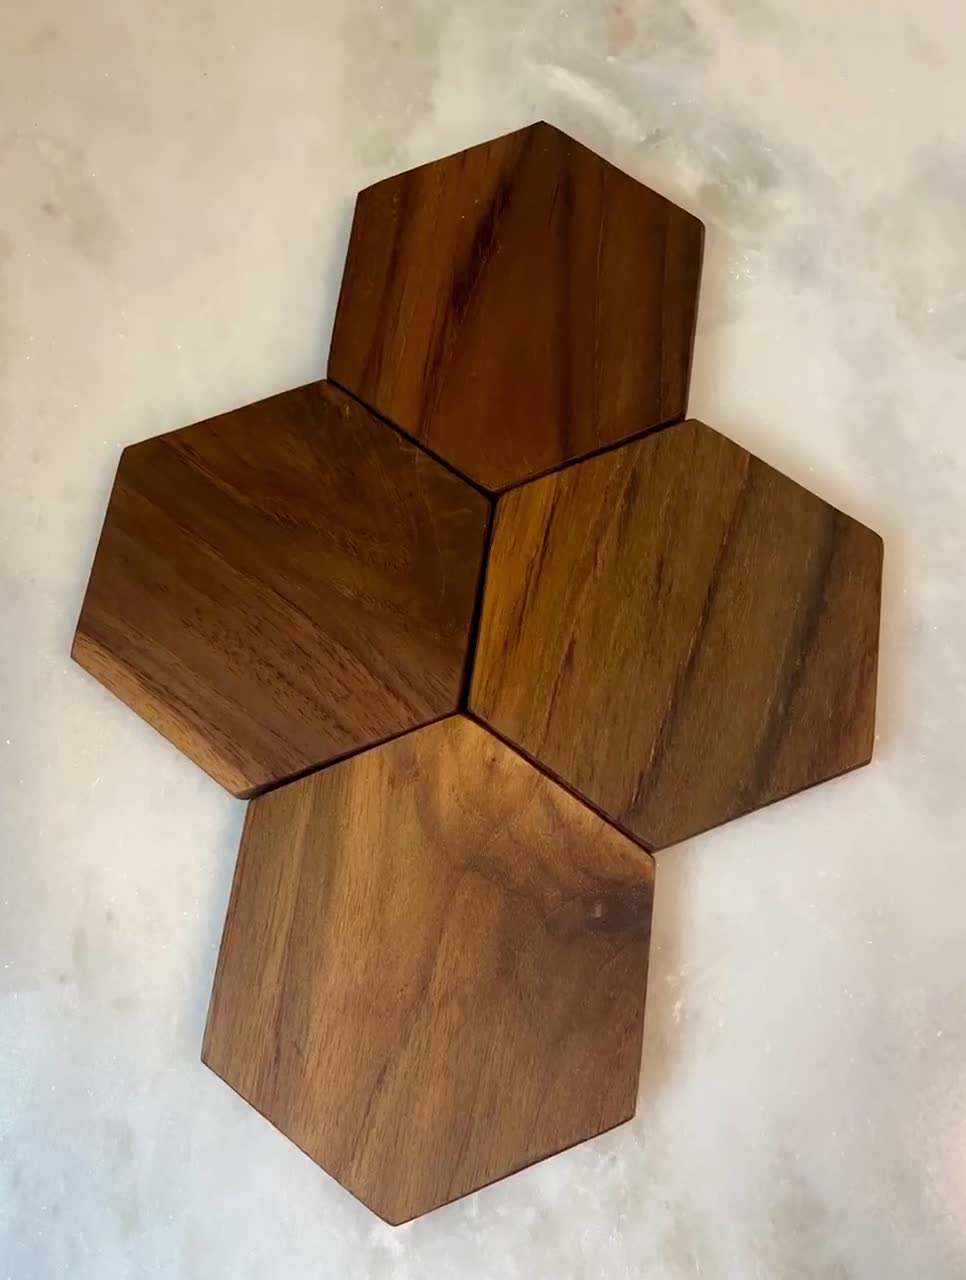 Home Decor Potters Appetizers Teak Wood Hexagon Coasters Set of 4 for Drinks 